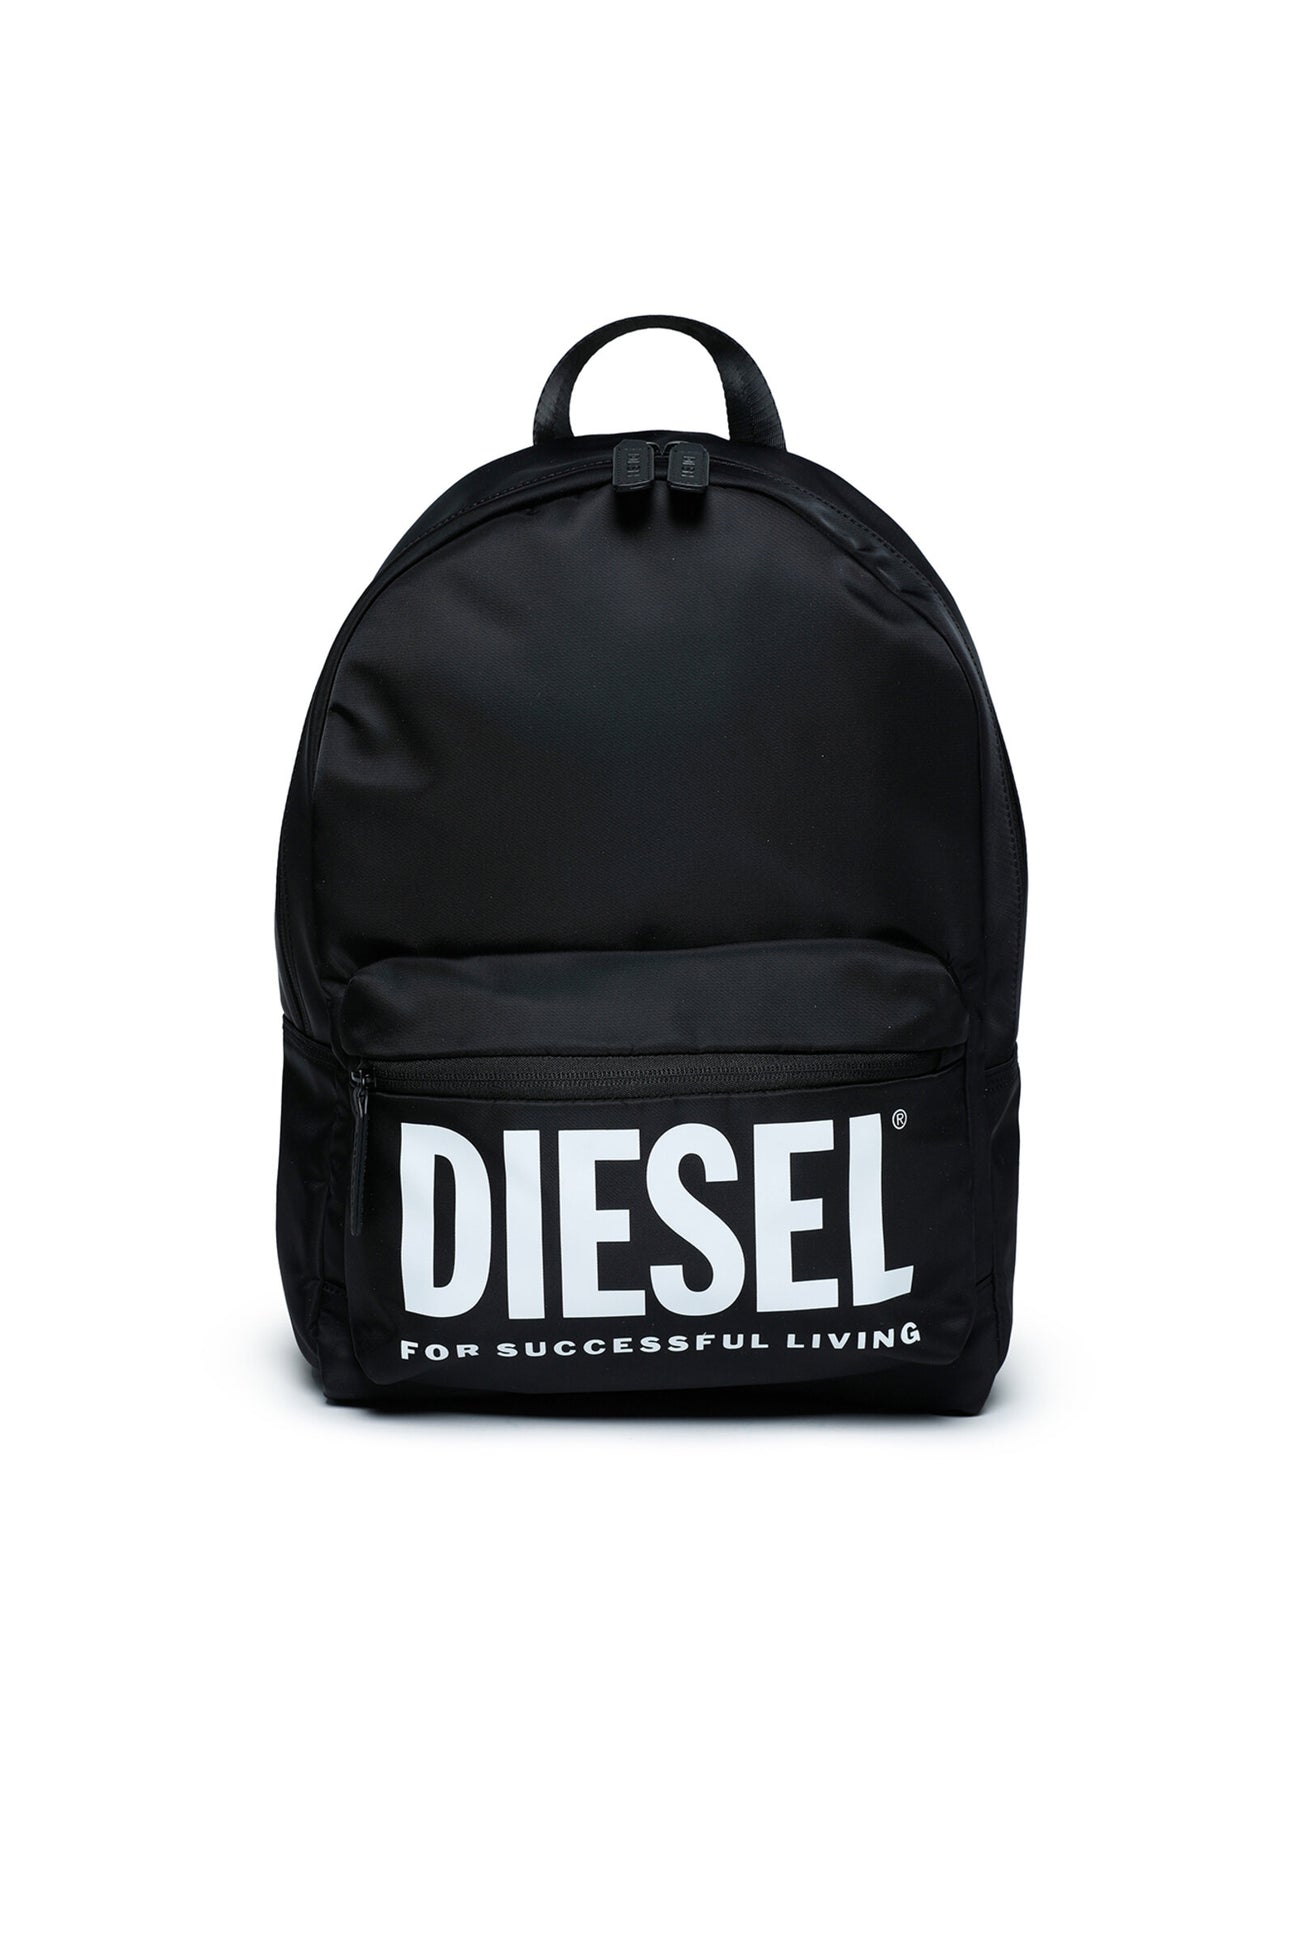 Black backpack with logo 